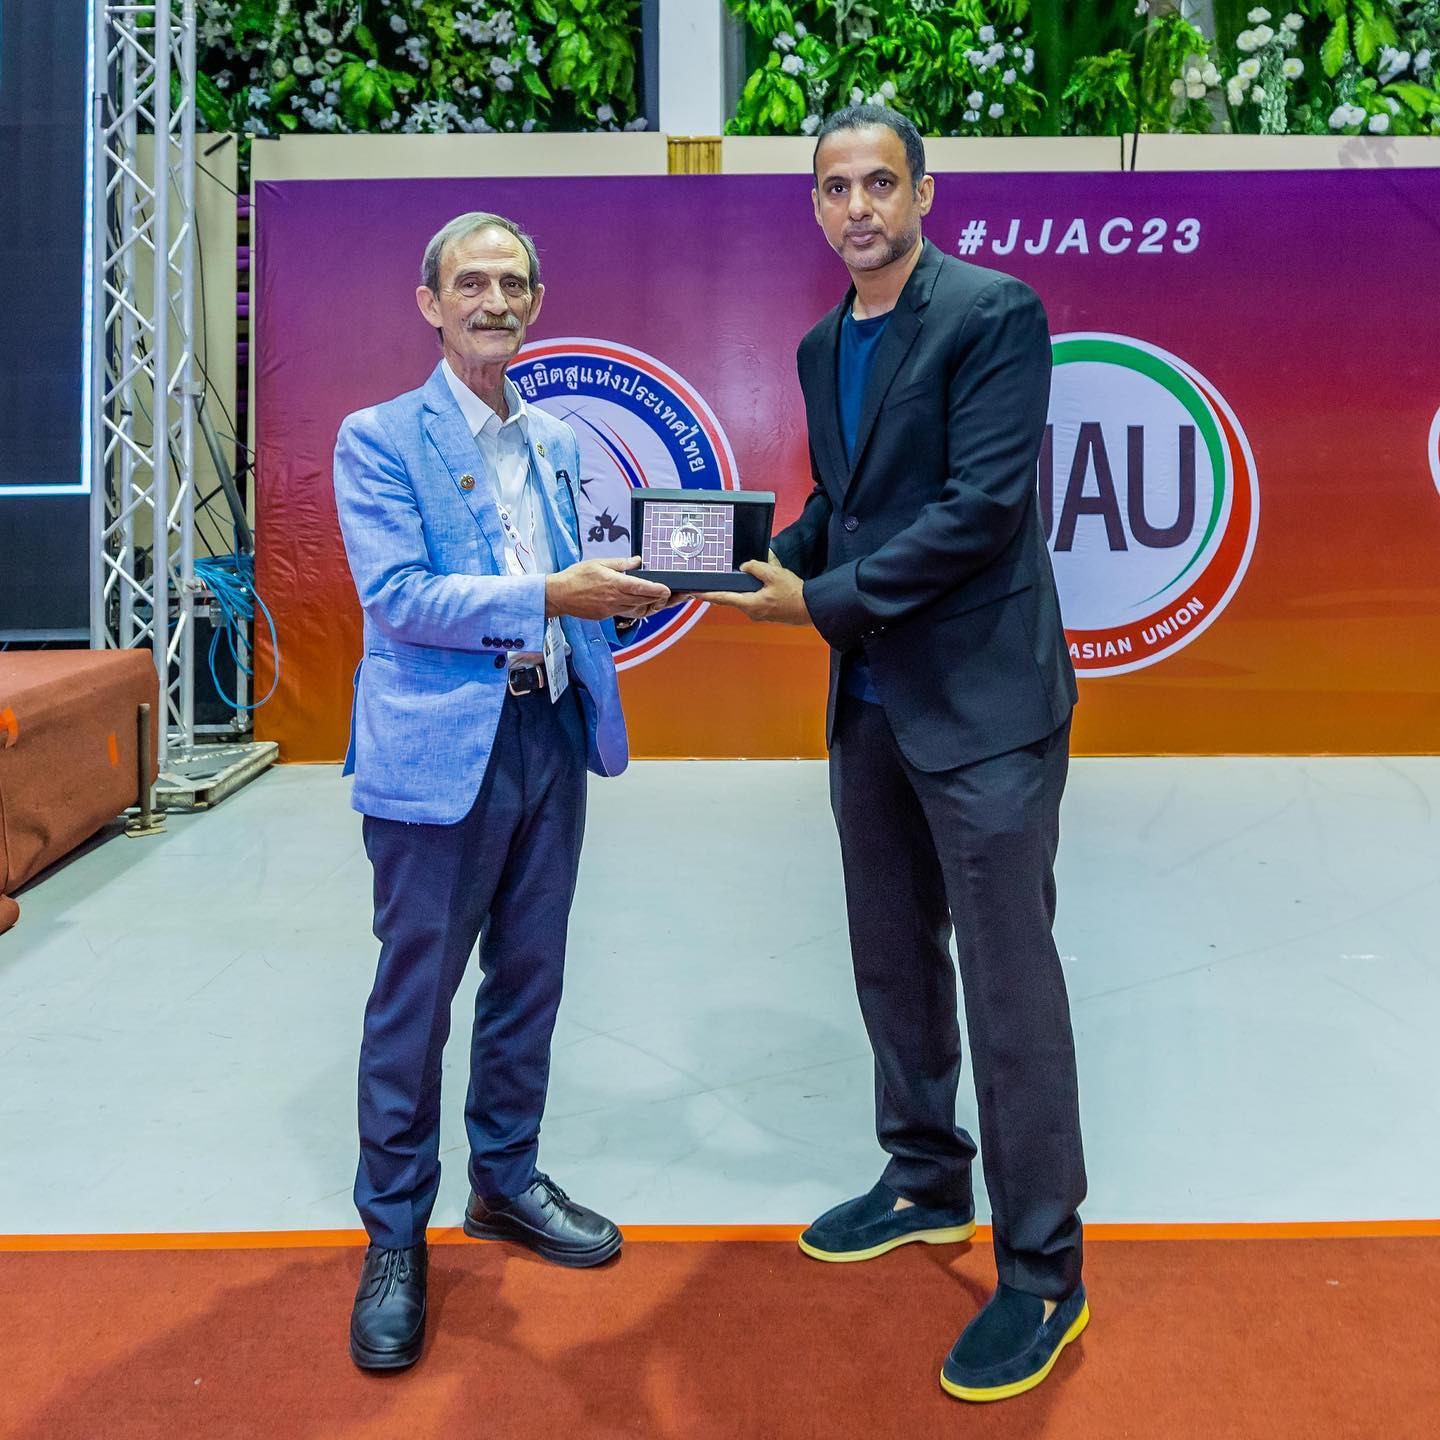 Ju-Jitsu International Federation President Panagiotis Theodoropoulos was then also commended for the work his organisation has done to oversee the Championships ©JJAU